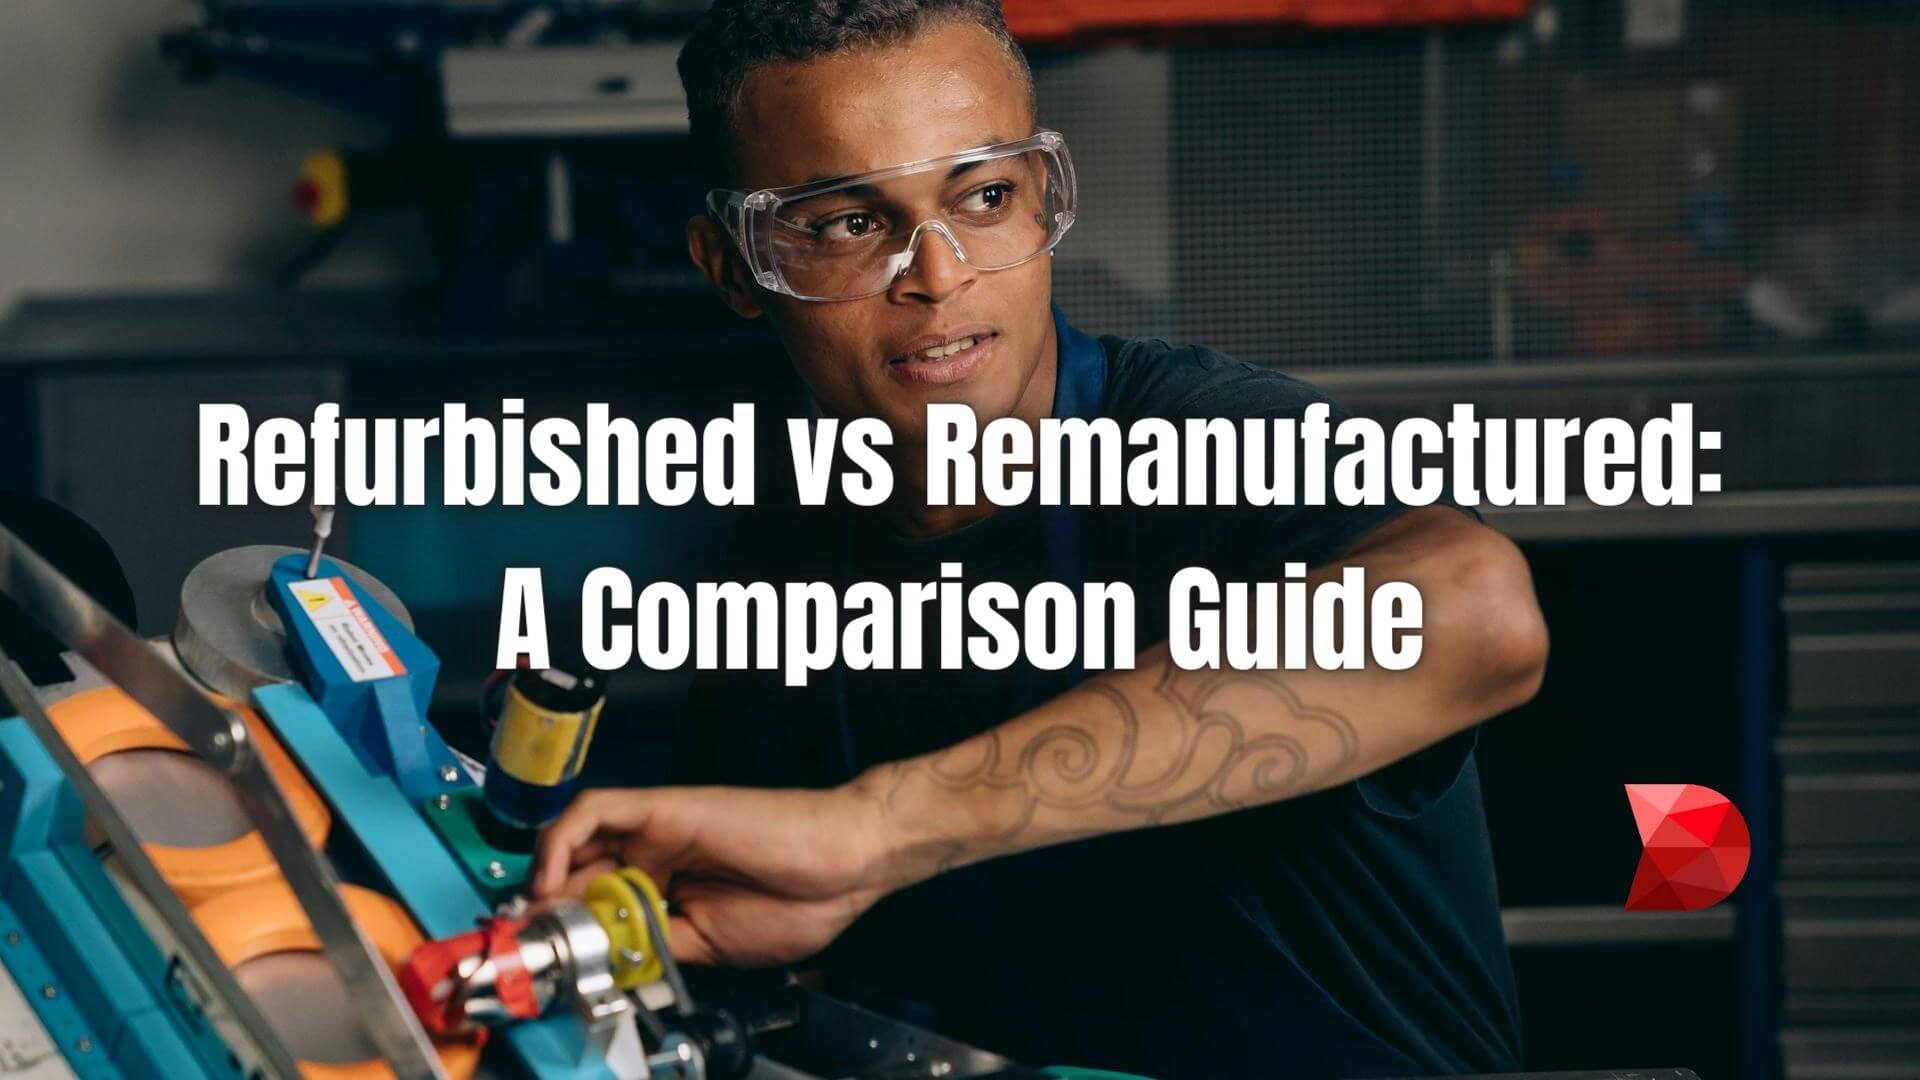 Make informed buying decisions today! Discover the key differences between refurbished vs. remanufactured products in our guide.